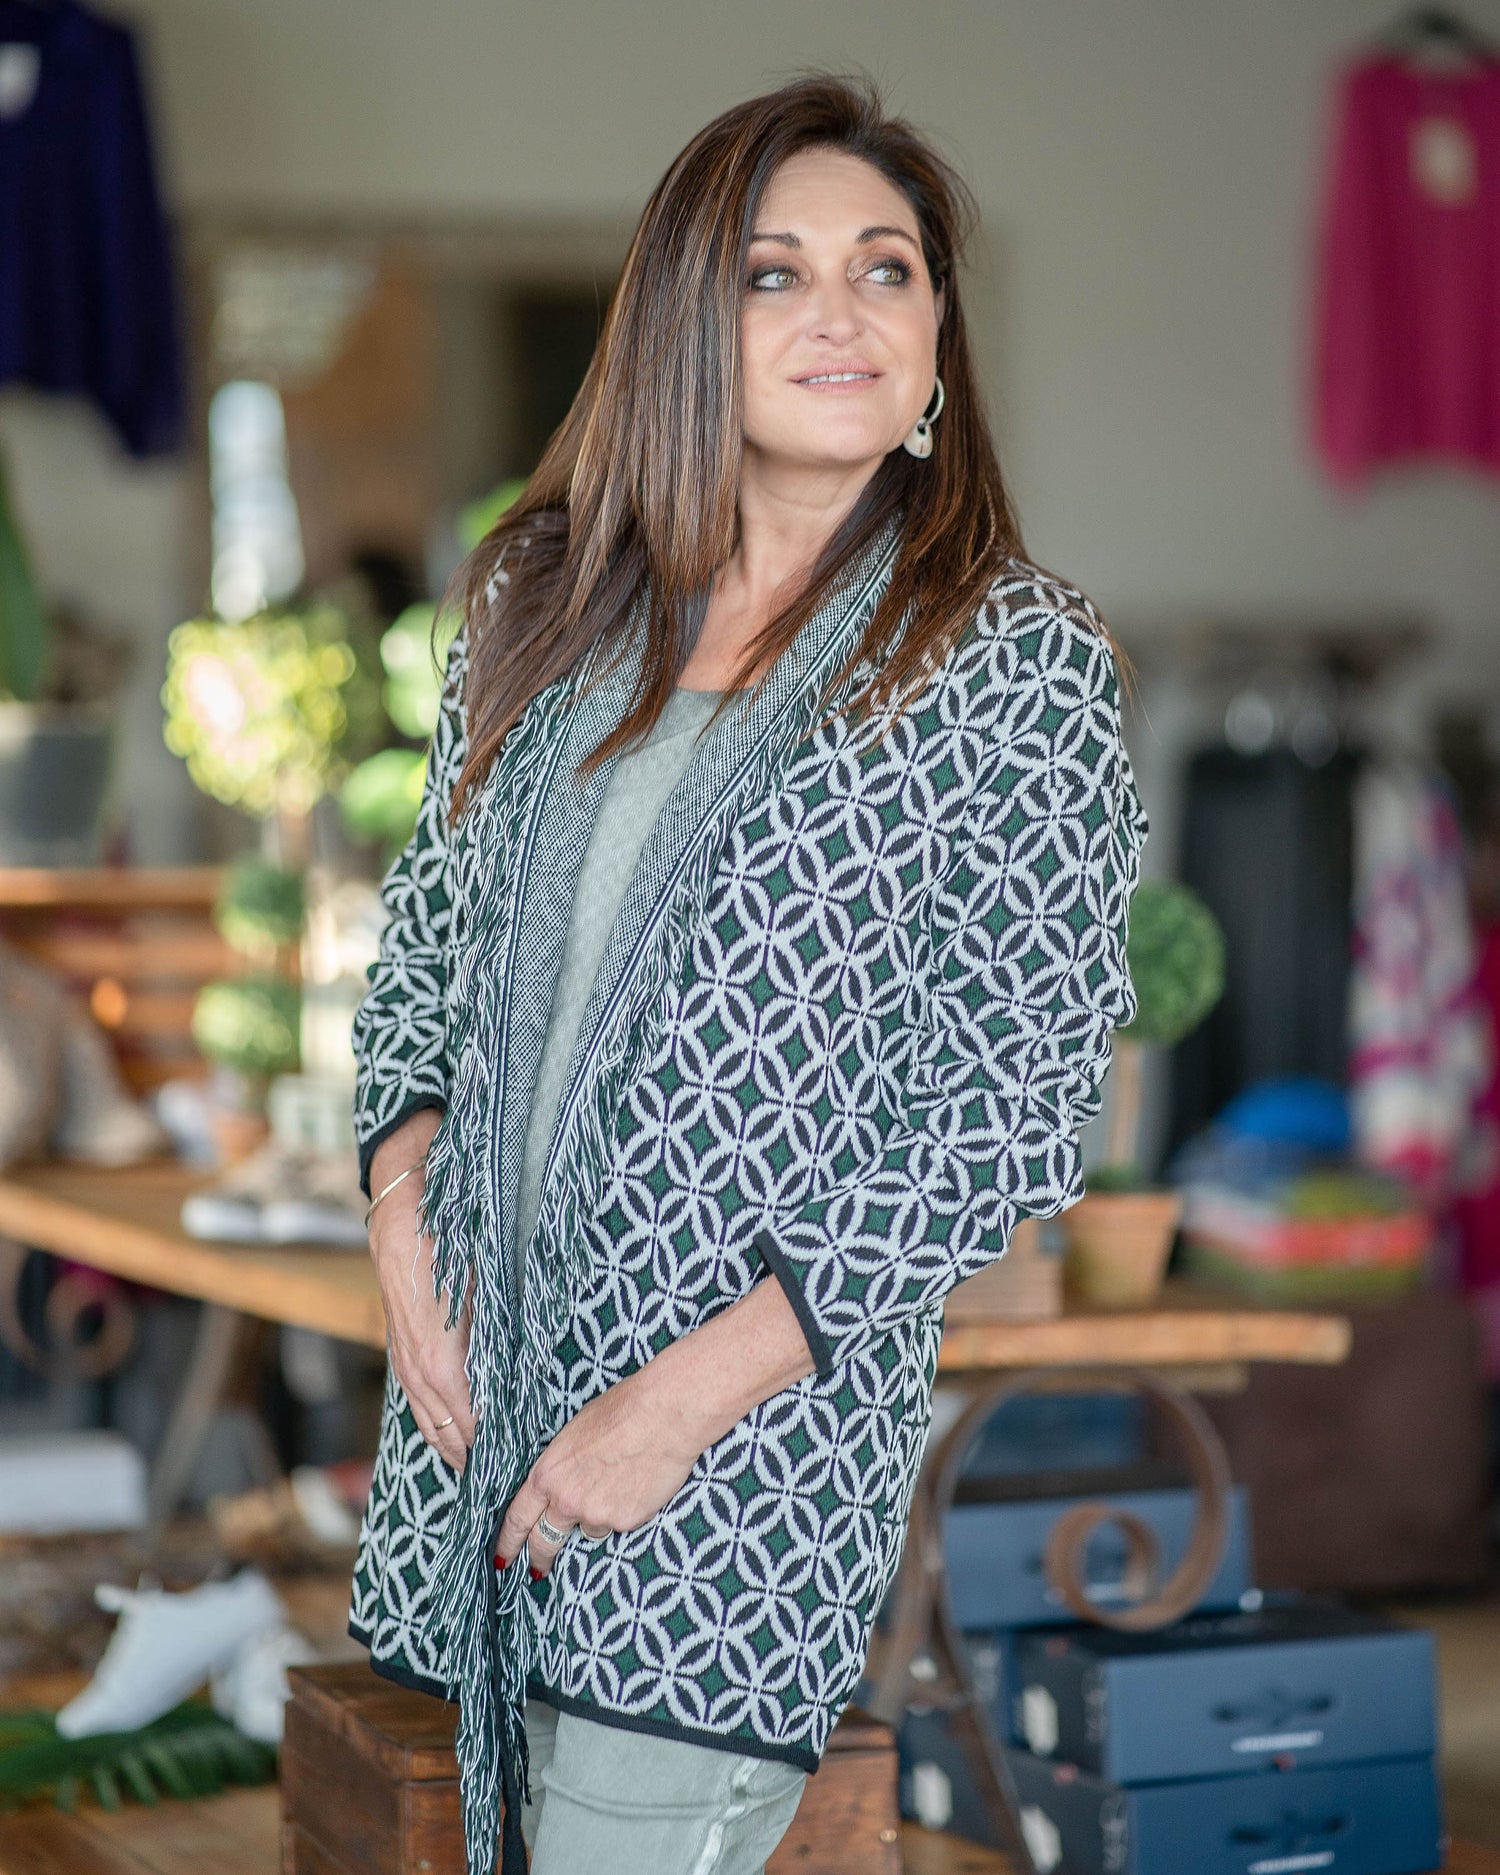 Once you try this poncho on - you wouldn't want to take it off! The colour scheme is vibrant and will easily pair with almost any outfit. The raw edge fringe detail adds so much sophistication to this look